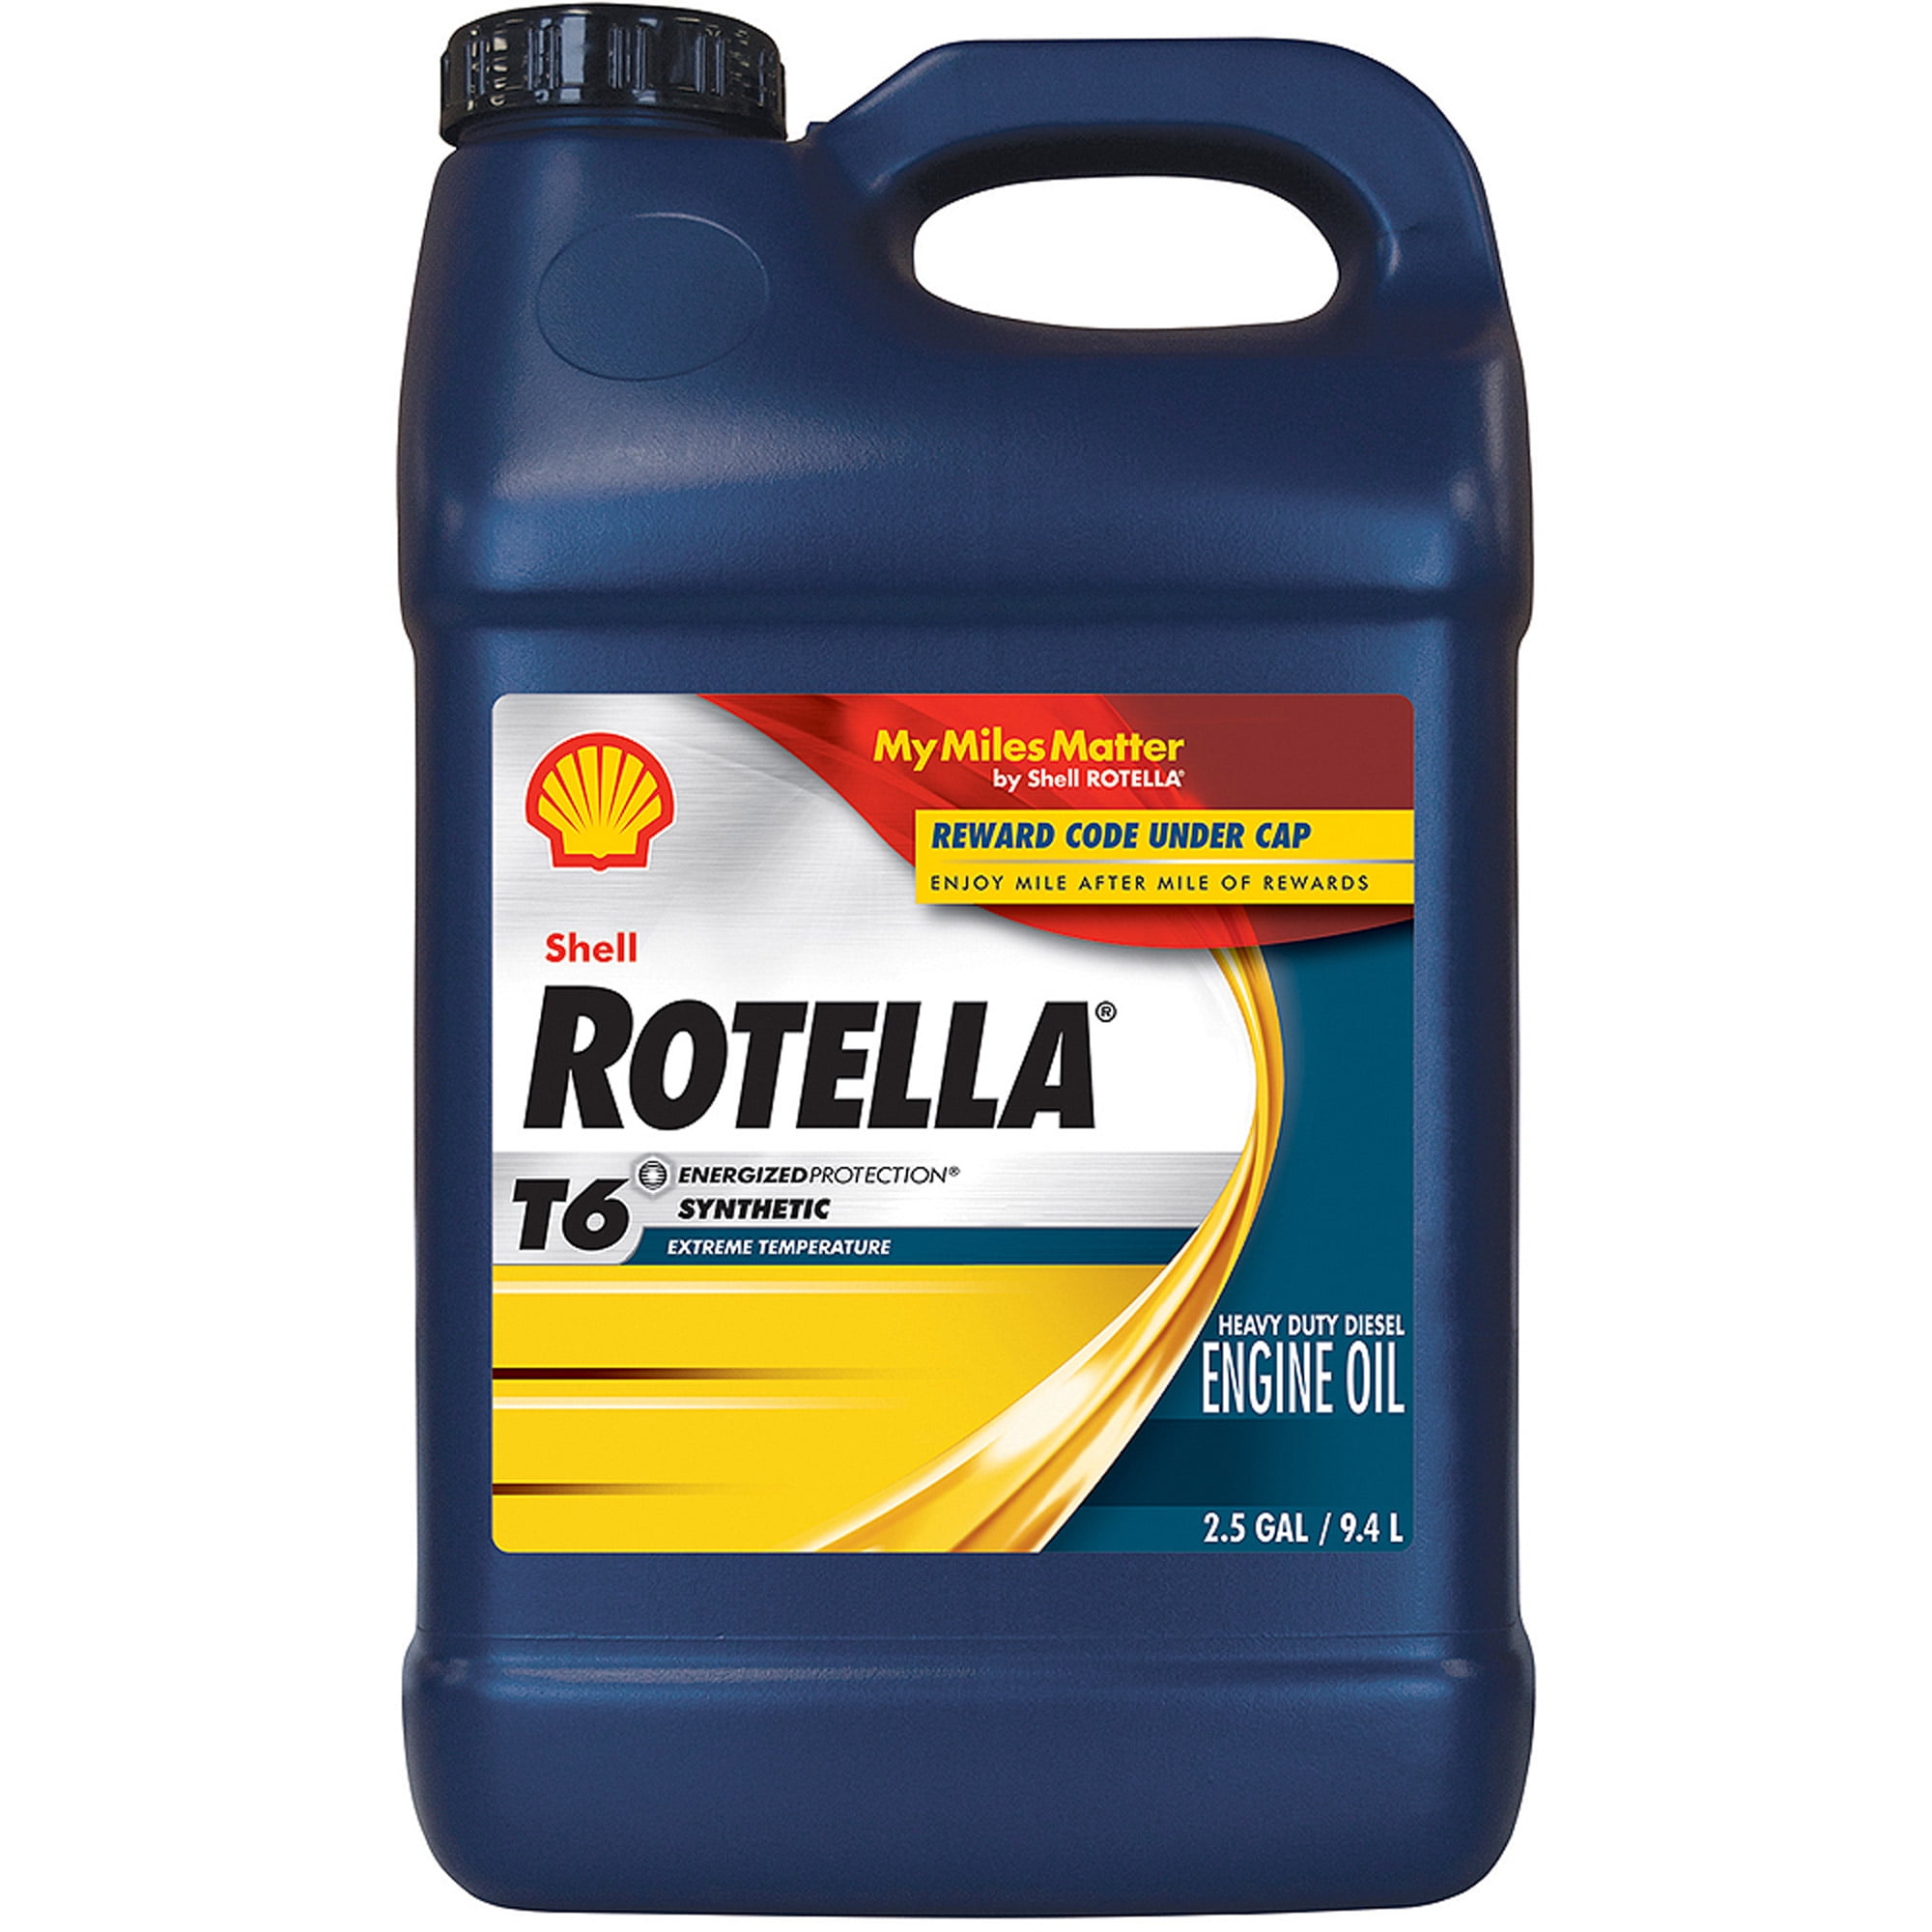 Does Rotella T6 Have Zinc